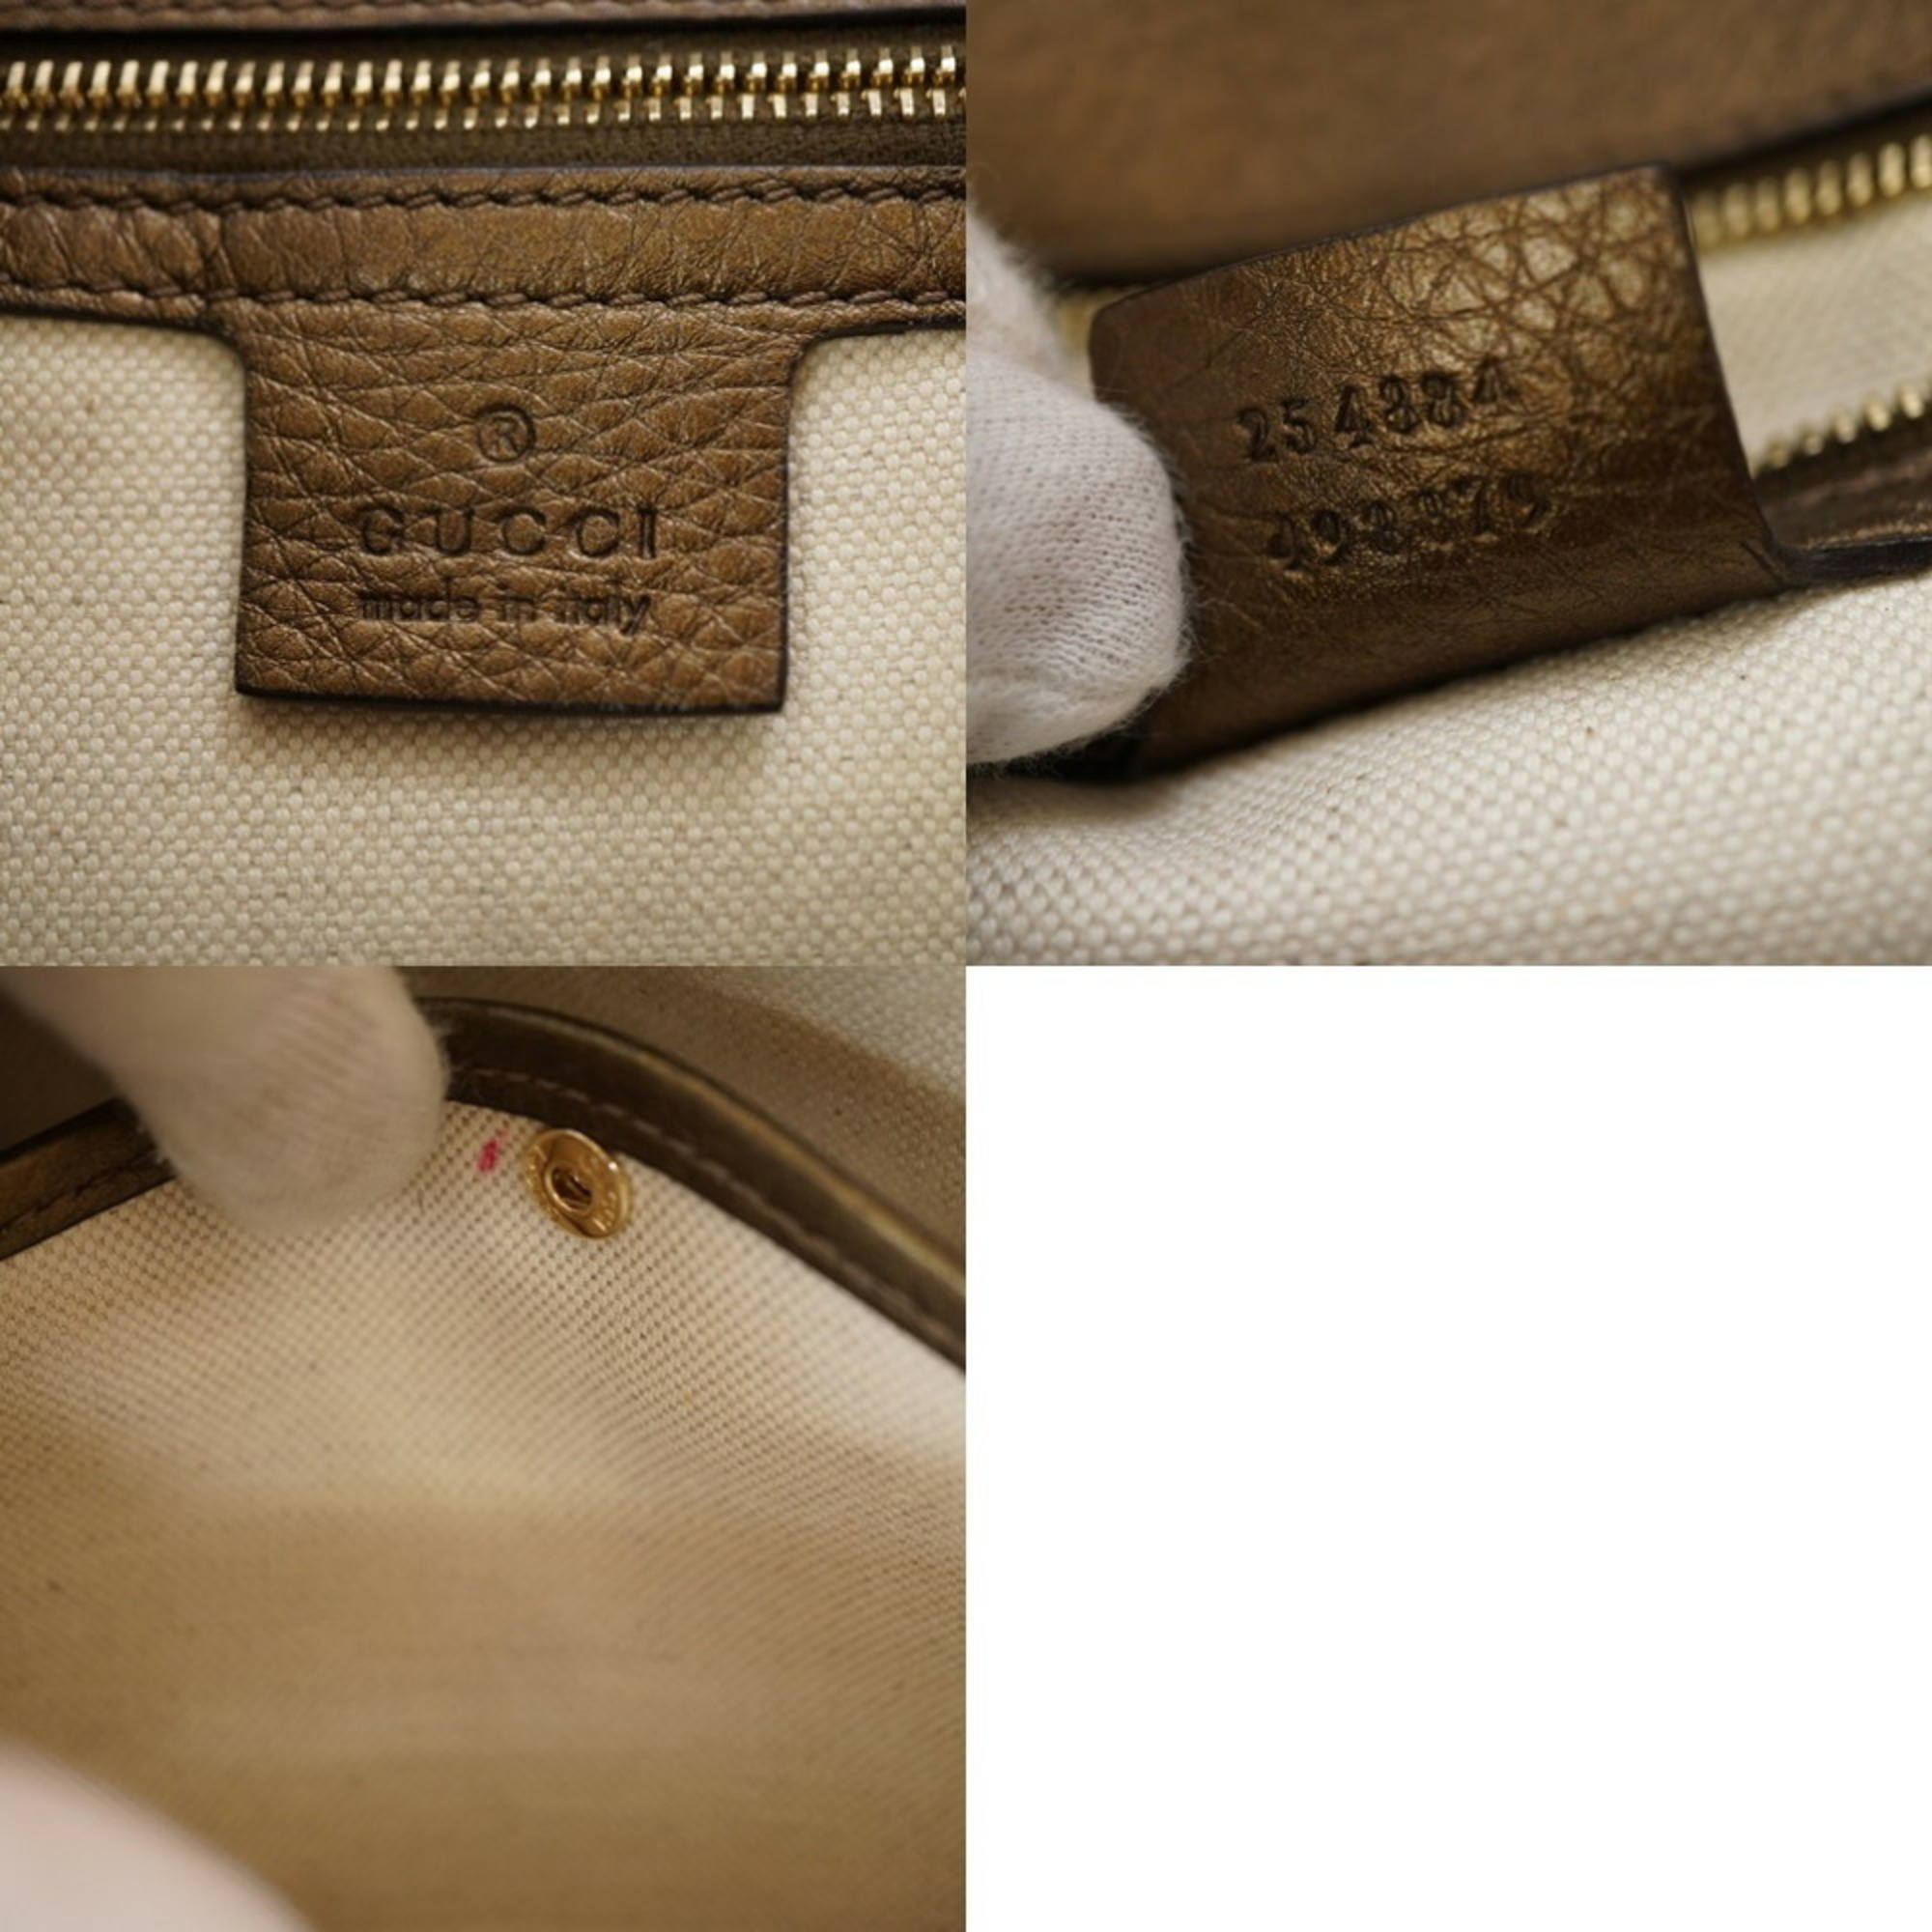 Gucci New Bamboo Shoulder Handbag 254884 Leather Gold with Strap 0020GUCCI